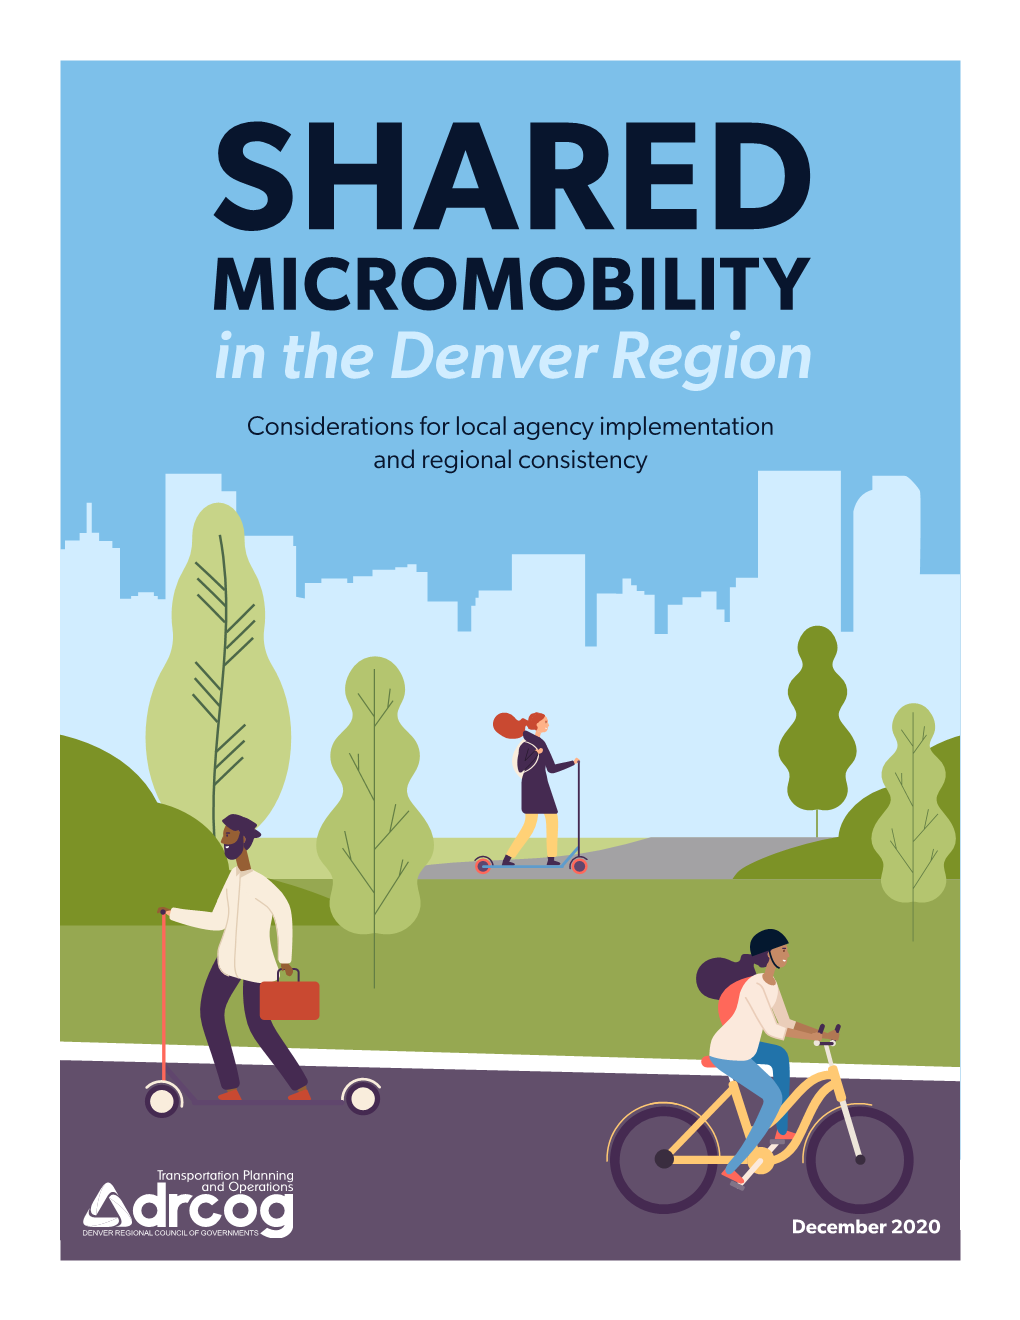 SHARED MICROMOBILITY in the Denver Region Considerations for Local Agency Implementation and Regional Consistency